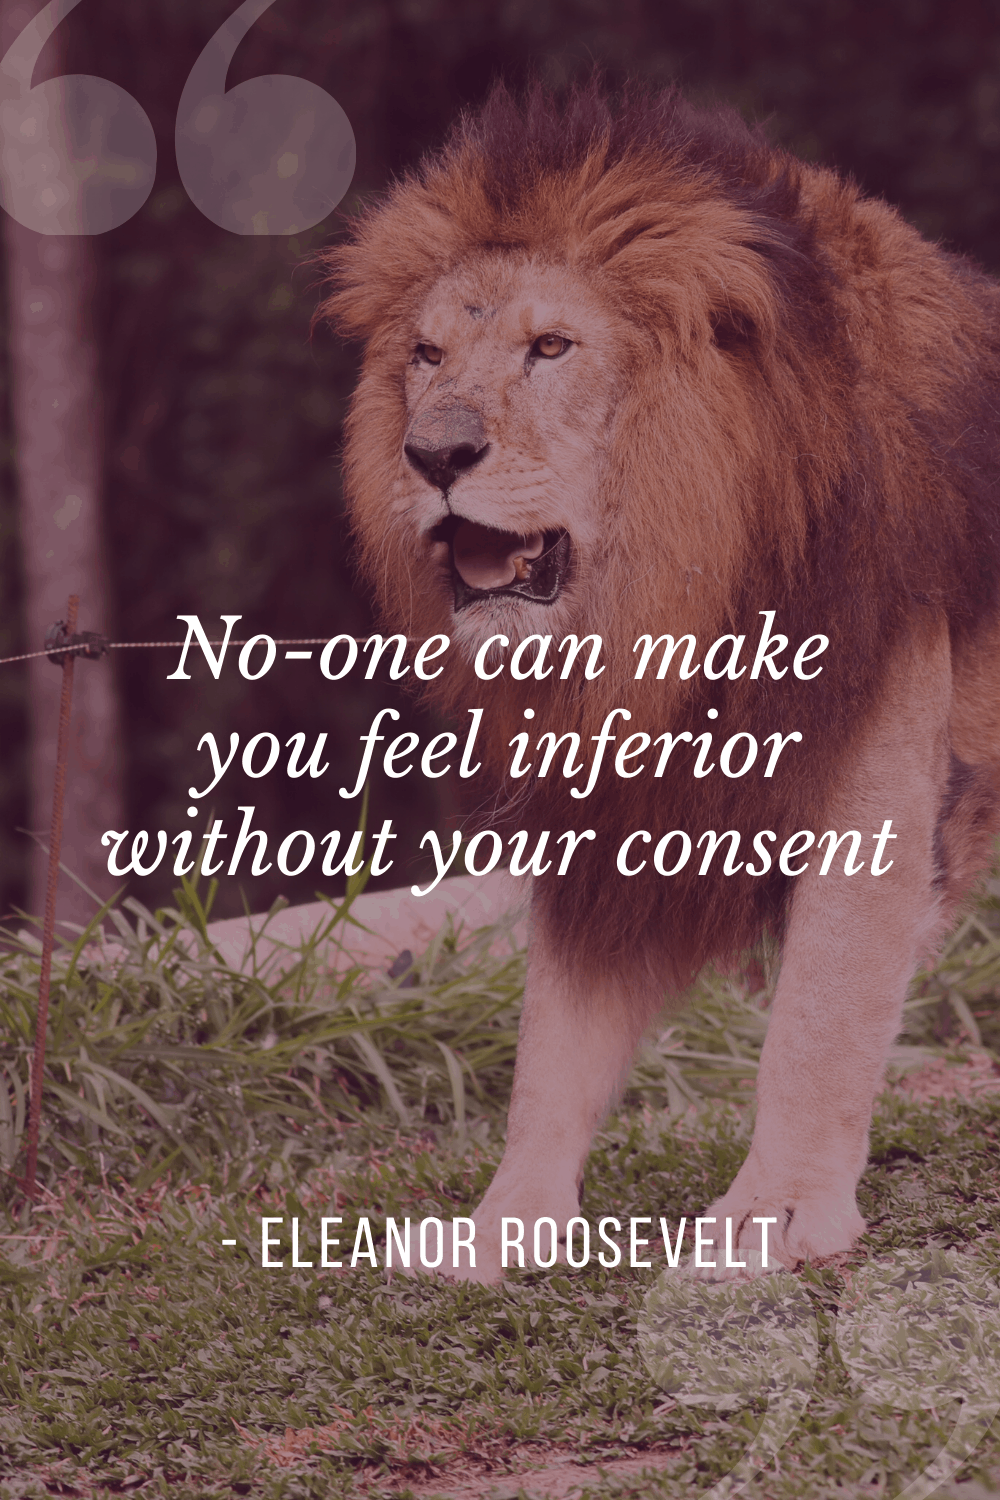 “No-one can make you feel inferior without your consent”, Eleanor Roosevelt